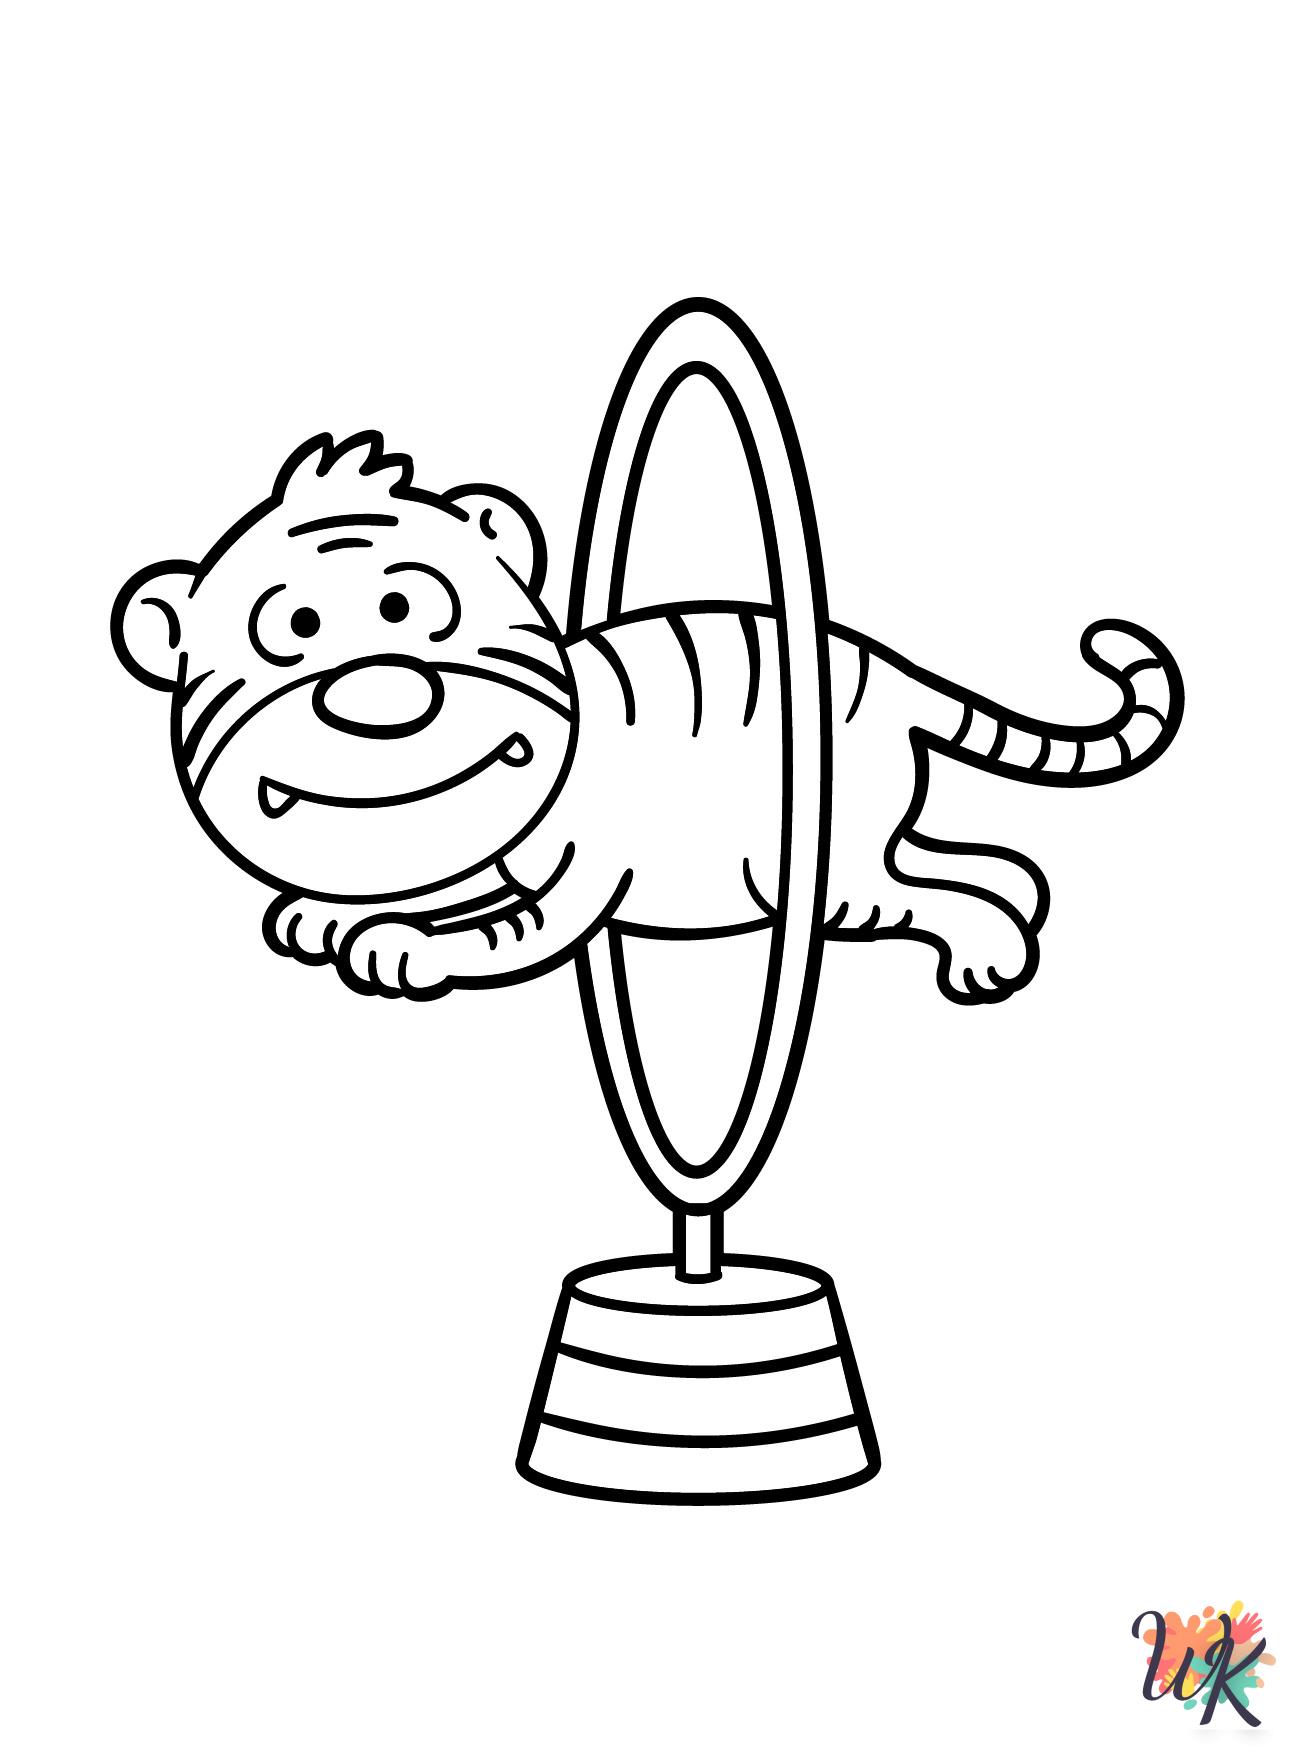 Circus coloring pages grinch